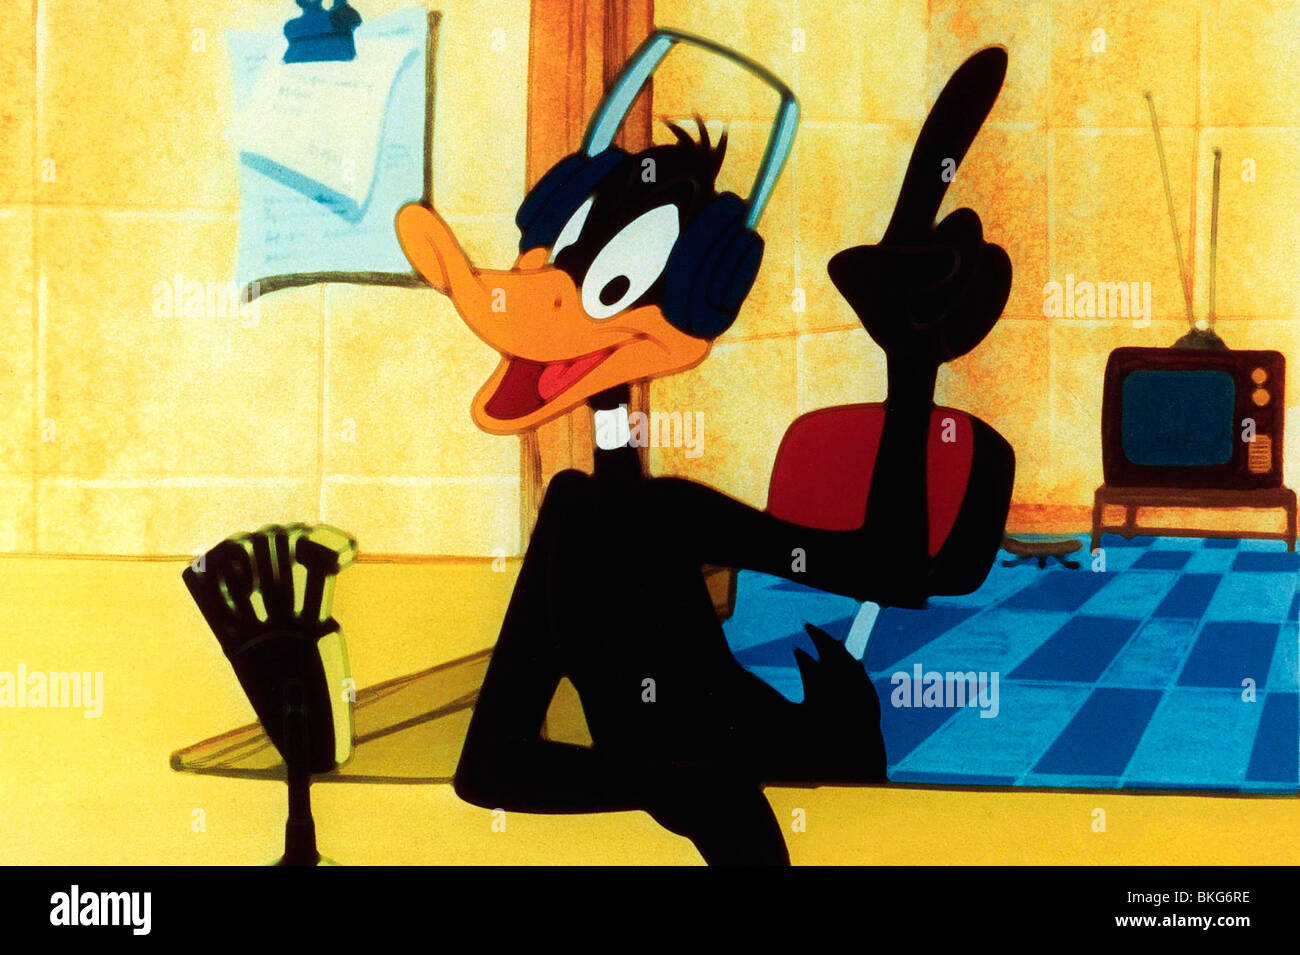 DAFFY DUCK (ANI) ANIMATED DAFFY DUCK (CHARACTER) DFDK 002 CP Stock Photo